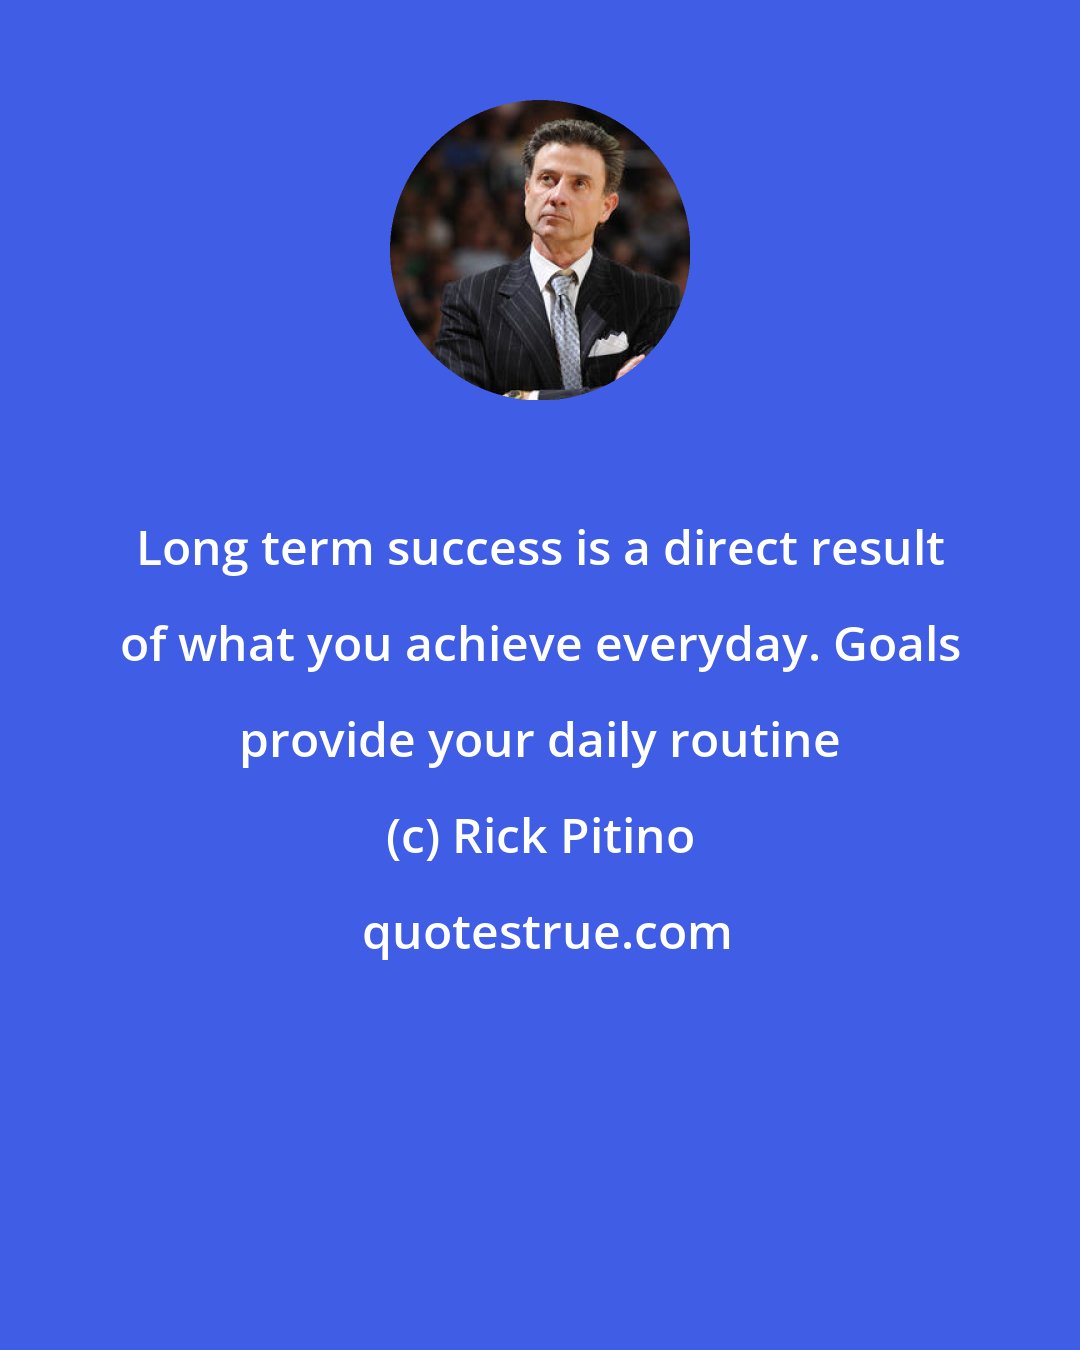 Rick Pitino: Long term success is a direct result of what you achieve everyday. Goals provide your daily routine